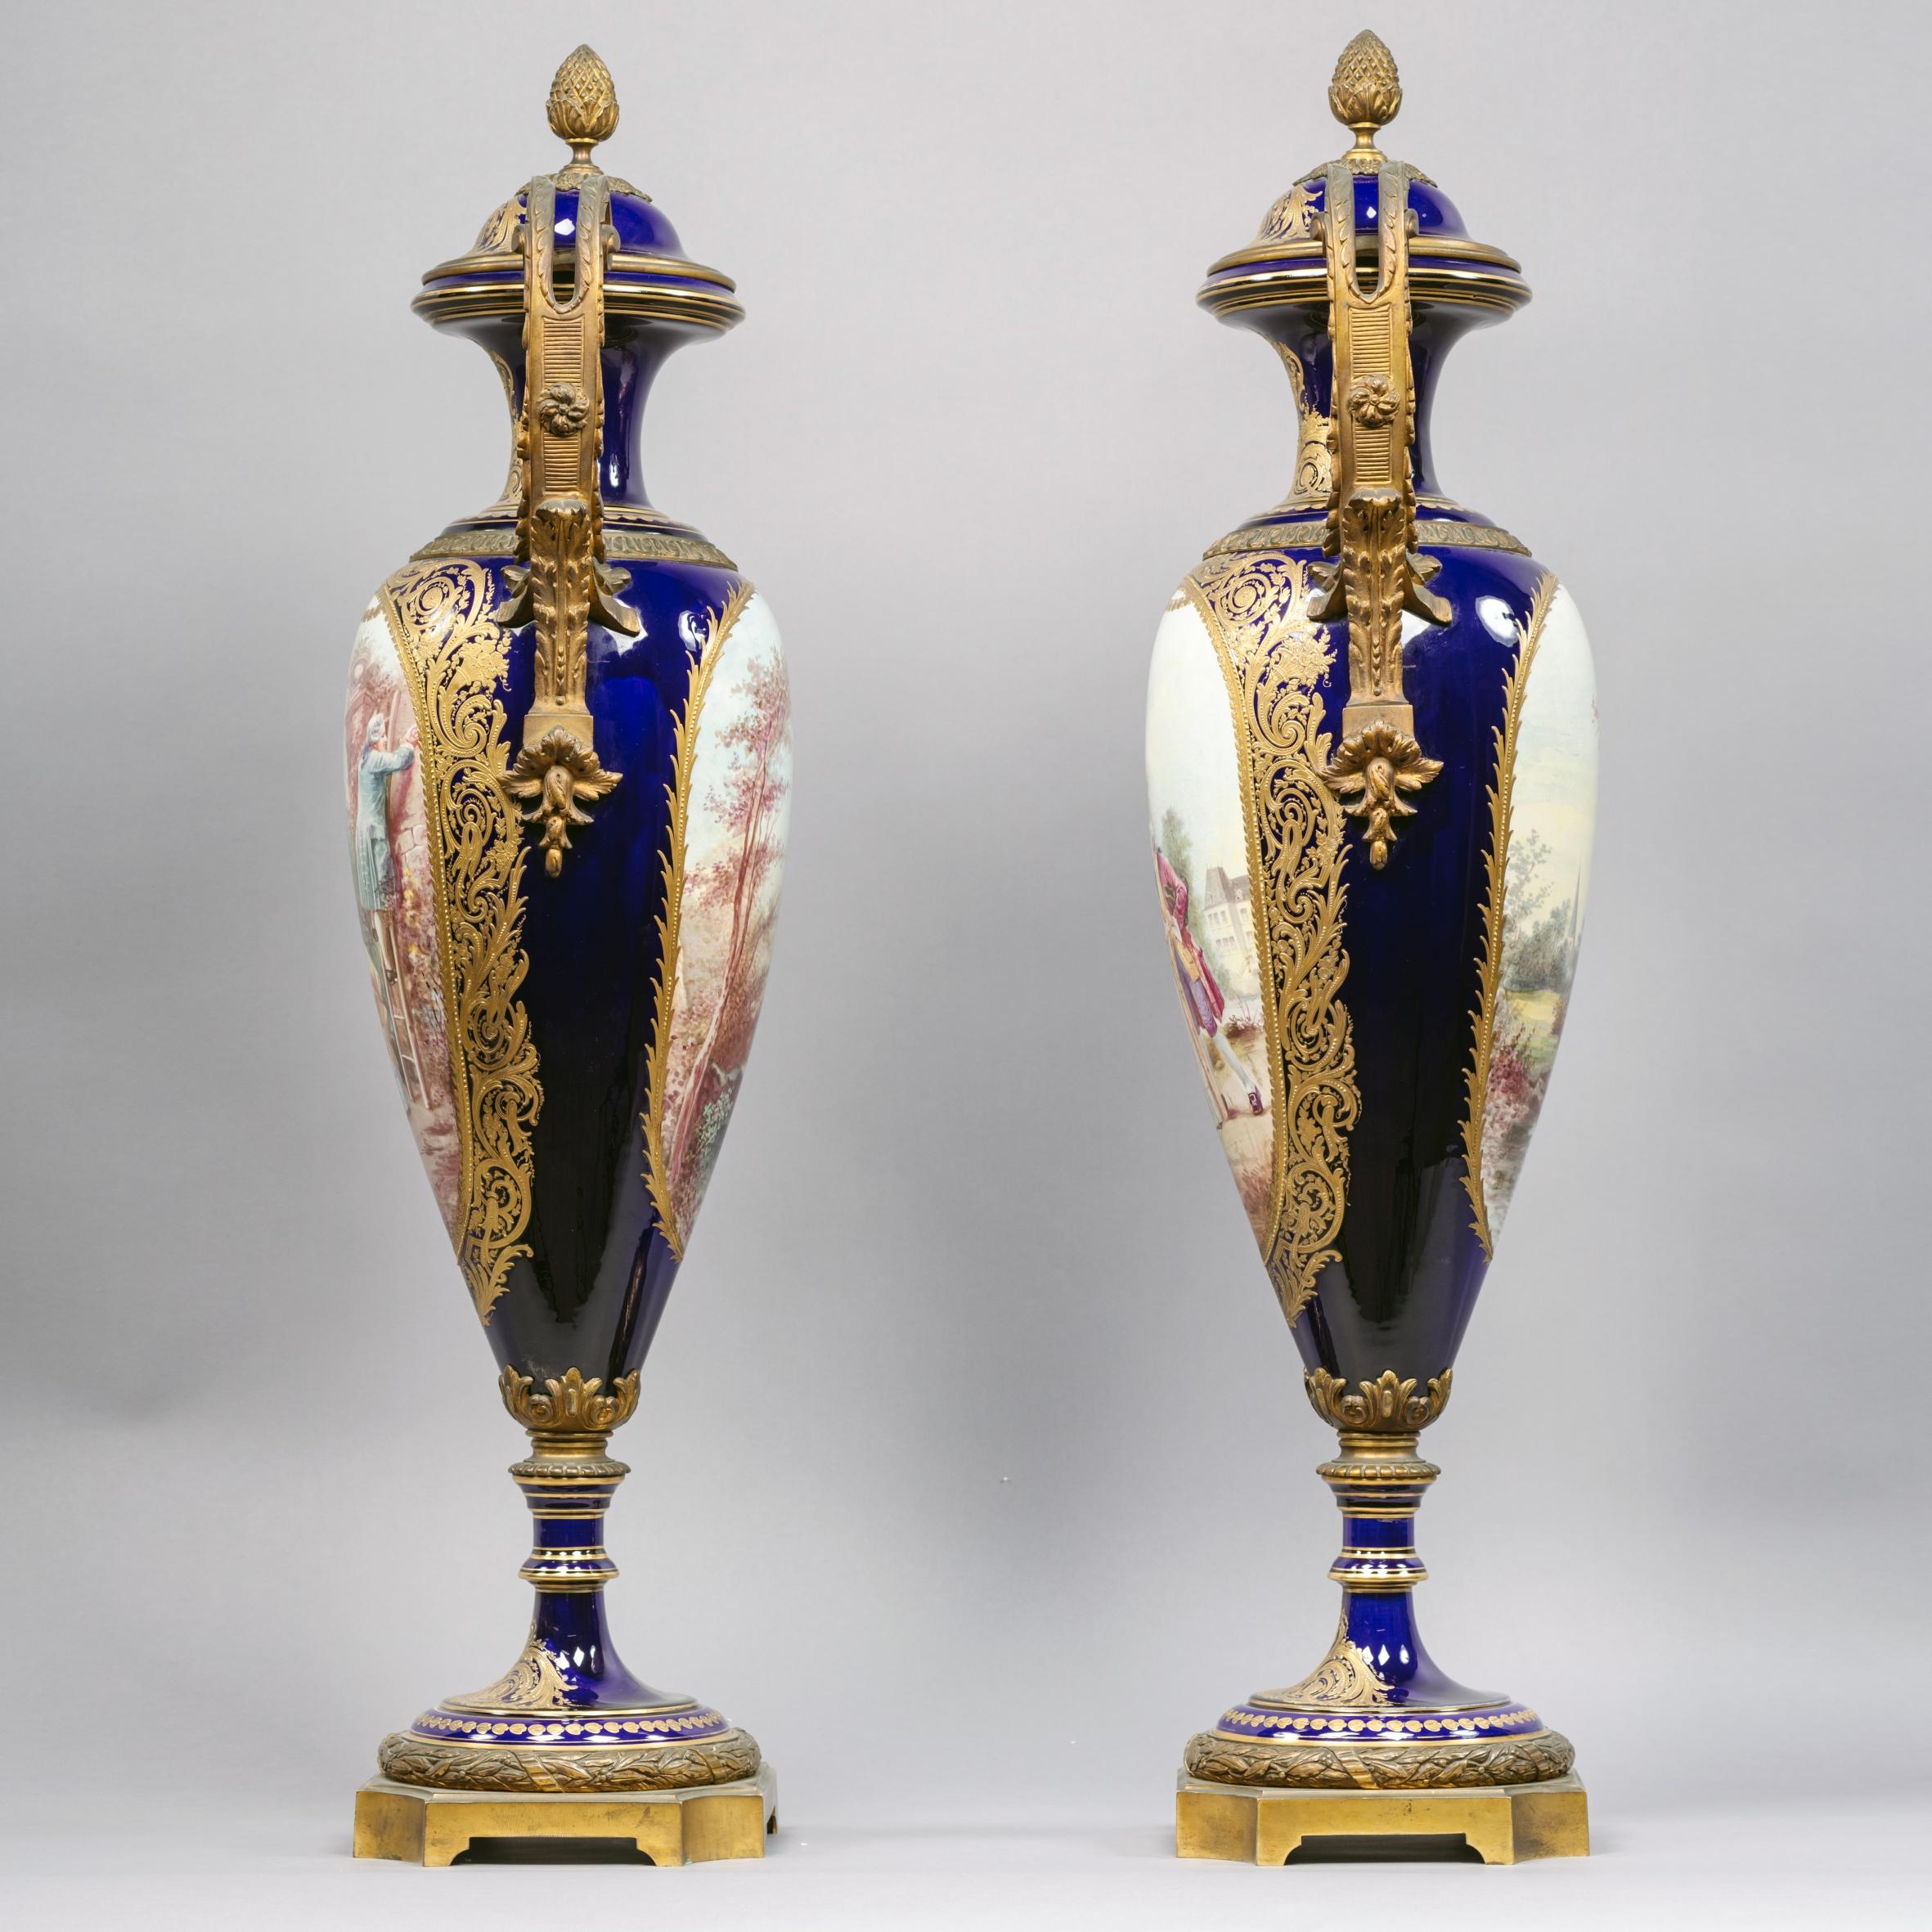 Louis XVI Pair of Gilt-Bronze Sèvres Style Porcelain Vases and Covers For Sale